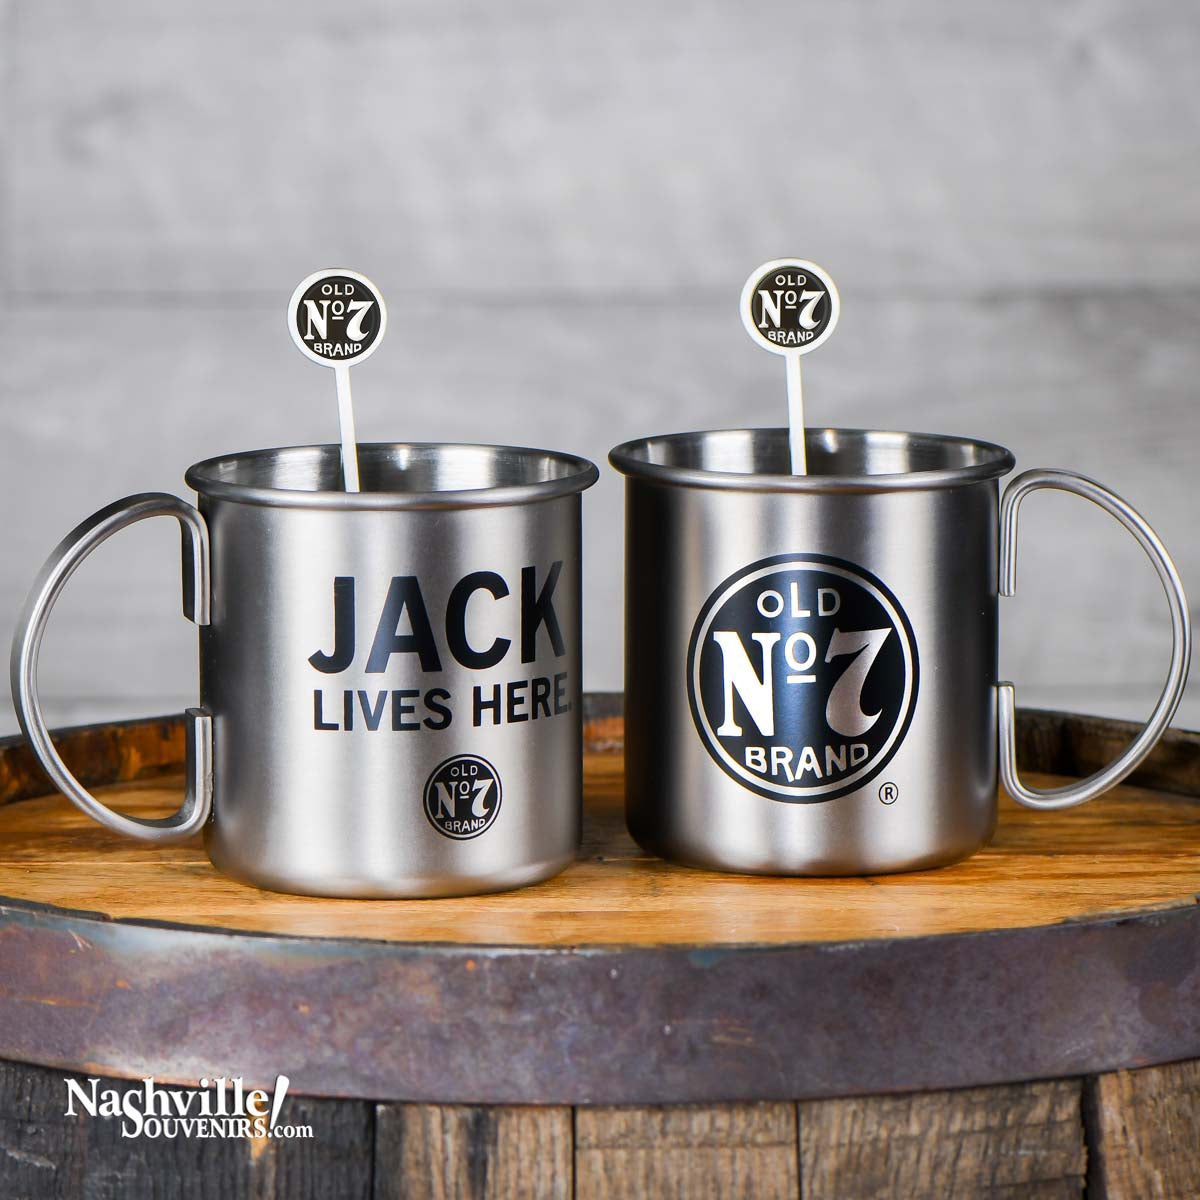 Whoa Mule! Forget about Moscow and kick it up with a Jack Daniel's Tennessee Mule Mug Set. Satisfy that hankering for a Tennessee Mule with this Tennessee born thoroughbred straight out of Lynchburg!